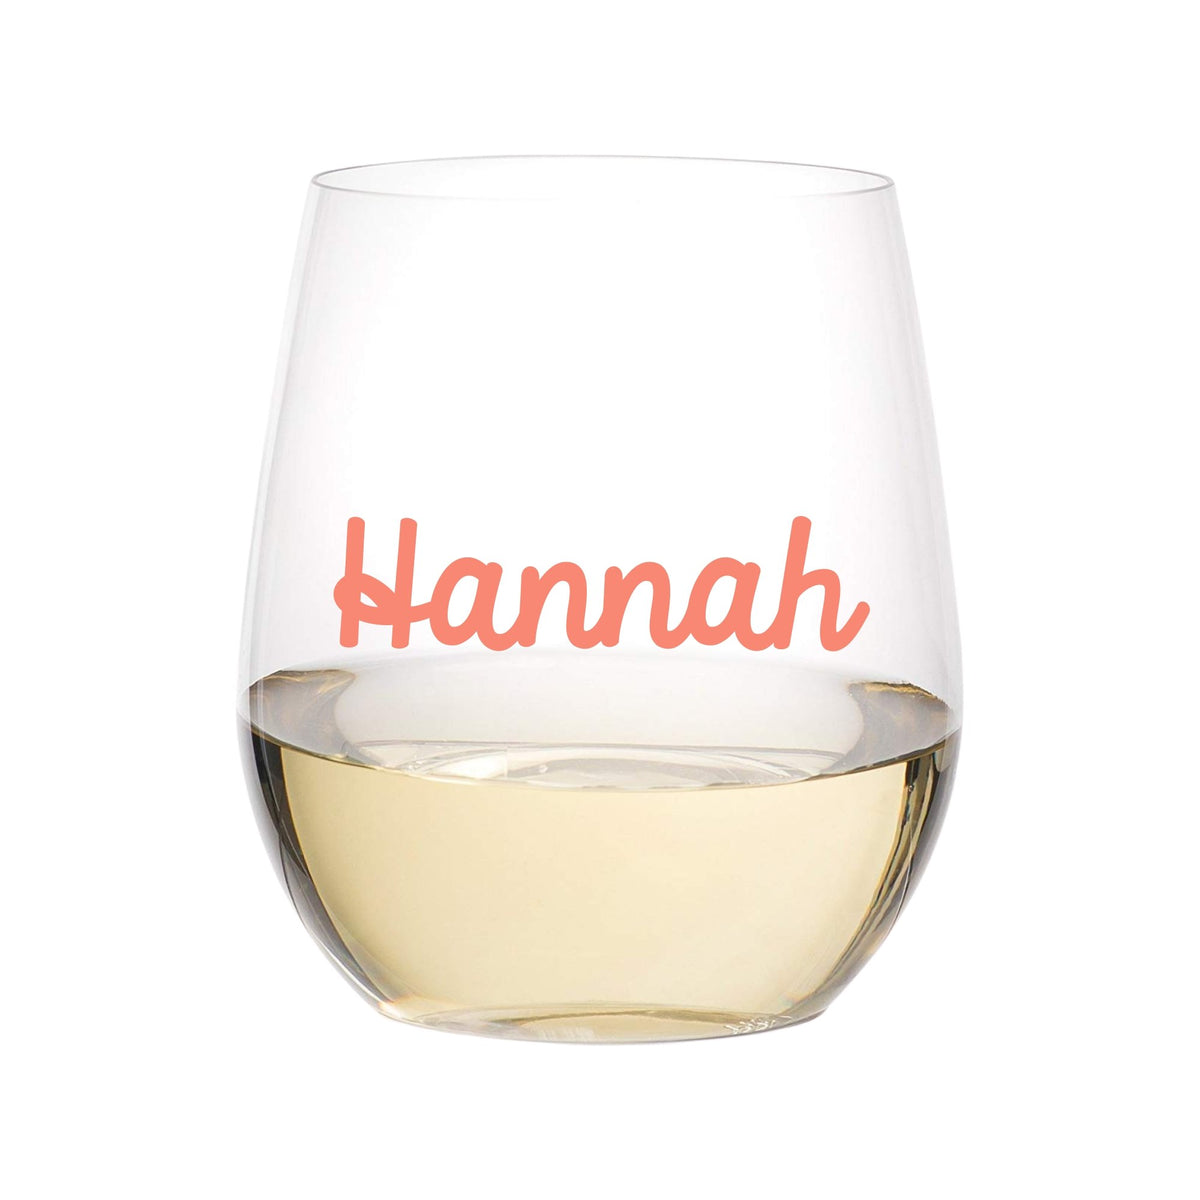 Personalized acrylic wine glasses - stemless